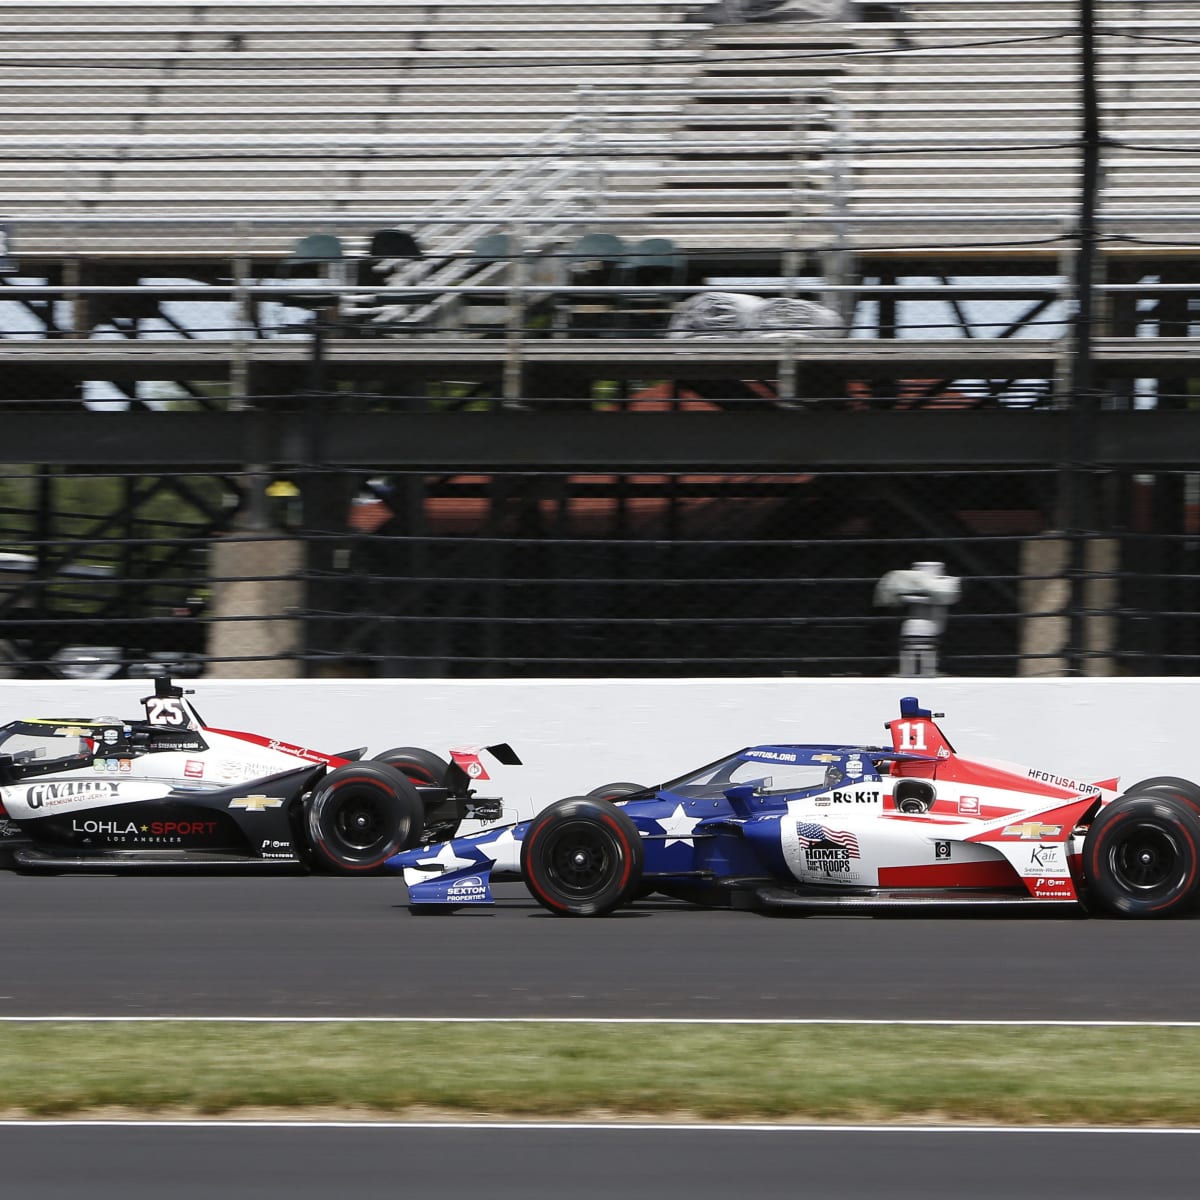 Friday's motorsports: Grosjean tops first IndyCar practice at Road